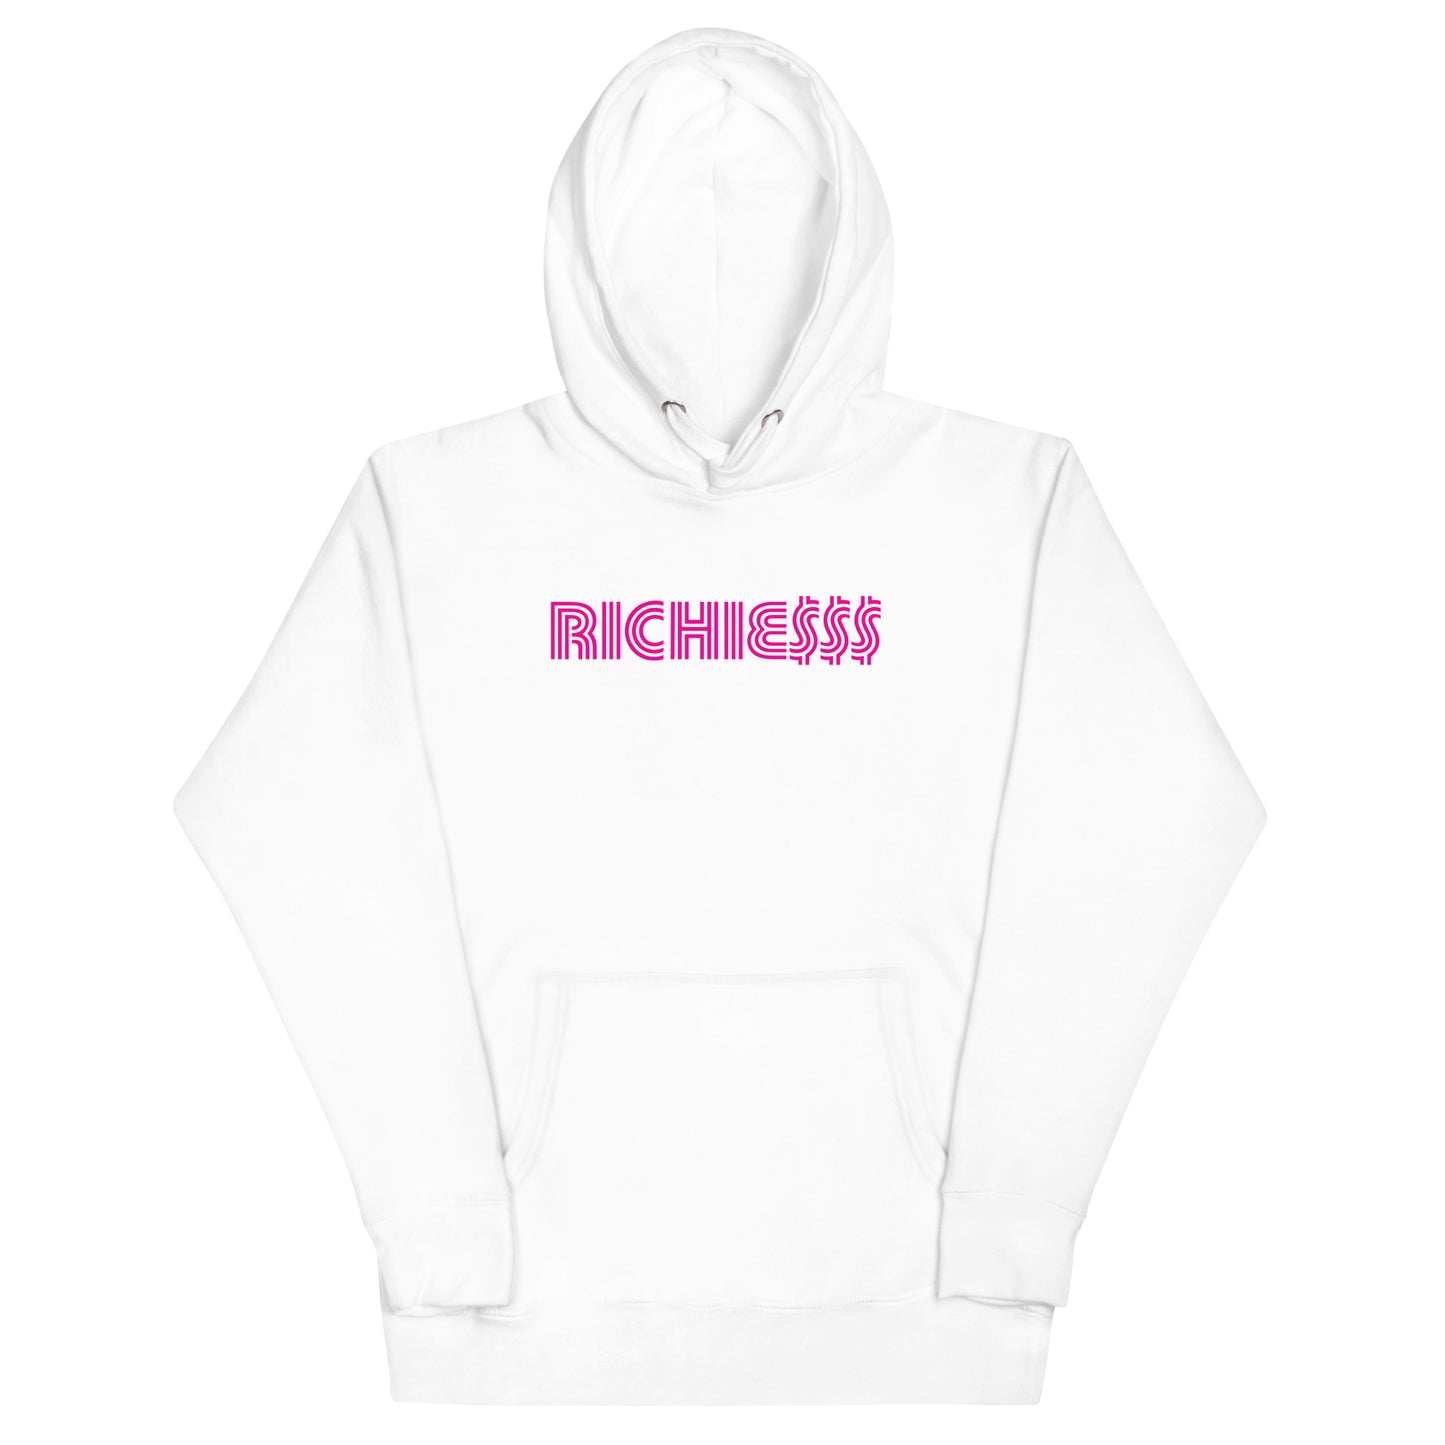 Even the Rich Richies Hooded Sweatshirt